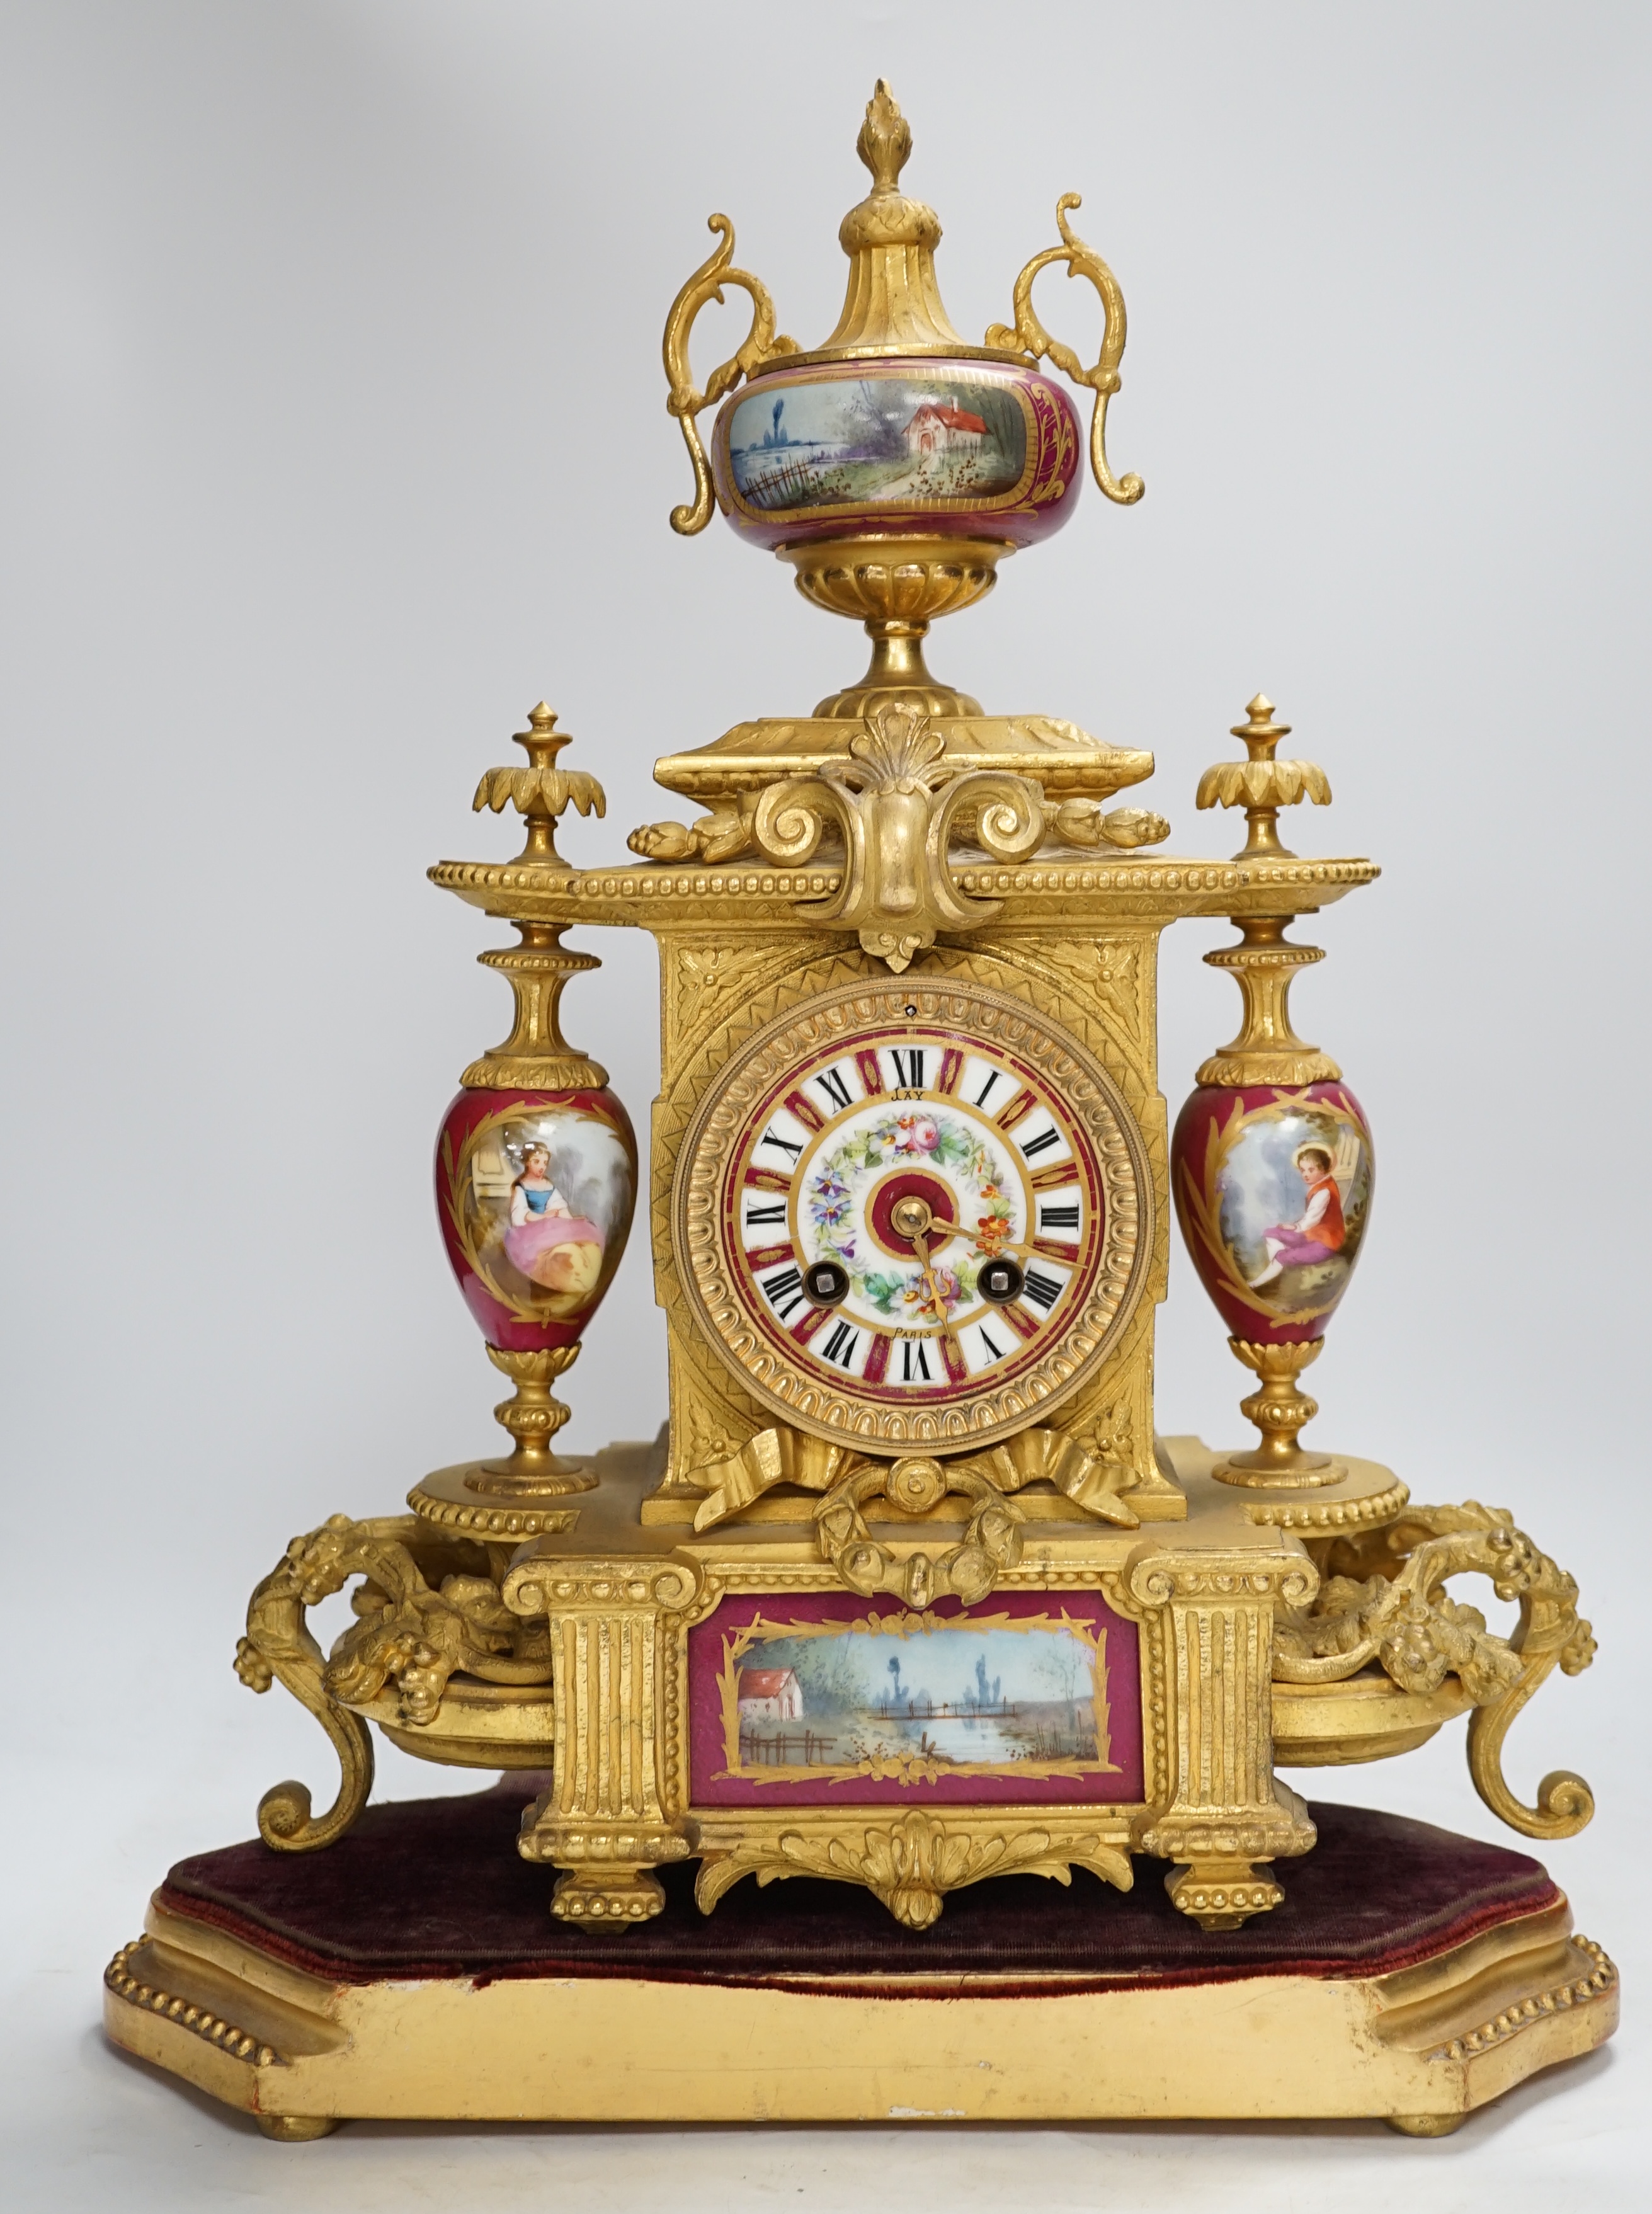 A late 19th century gilt spelter and porcelain mantel clock with two stands, a case, key and pendulum. Condition - fair to good. Not tested.